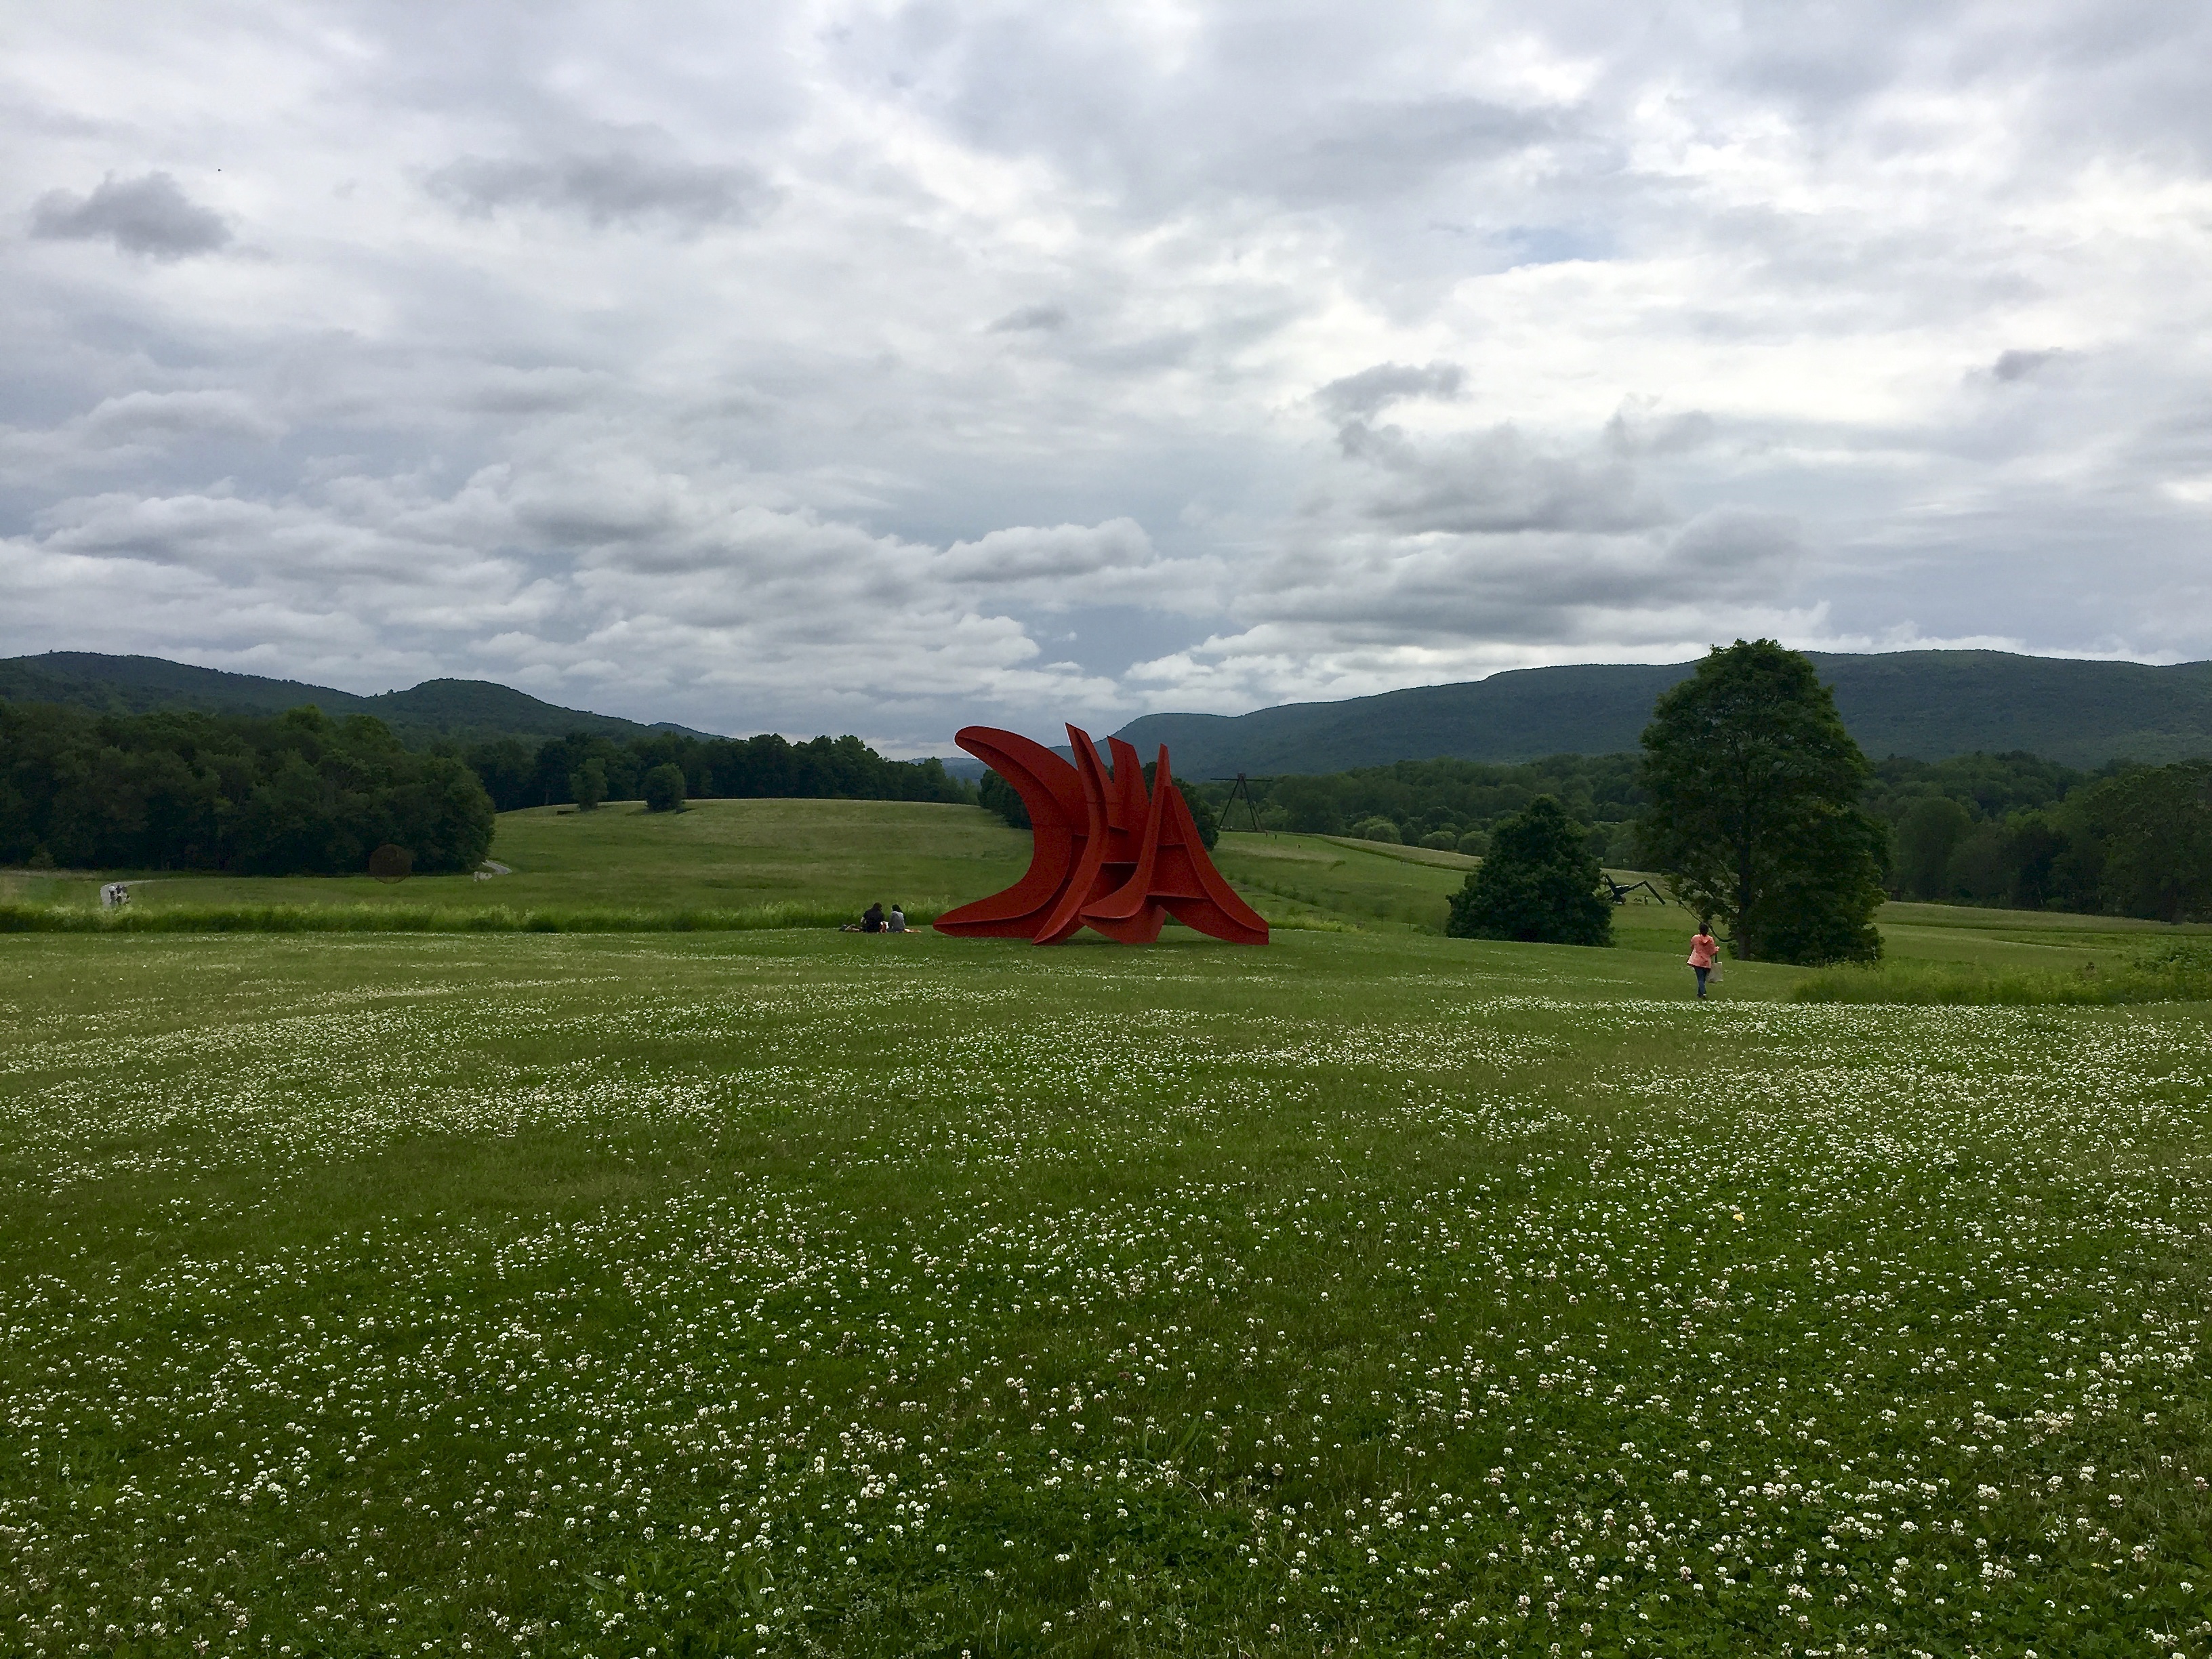 A photo of Five Swords, 1976, by Alexander Calder sitting in a green field.